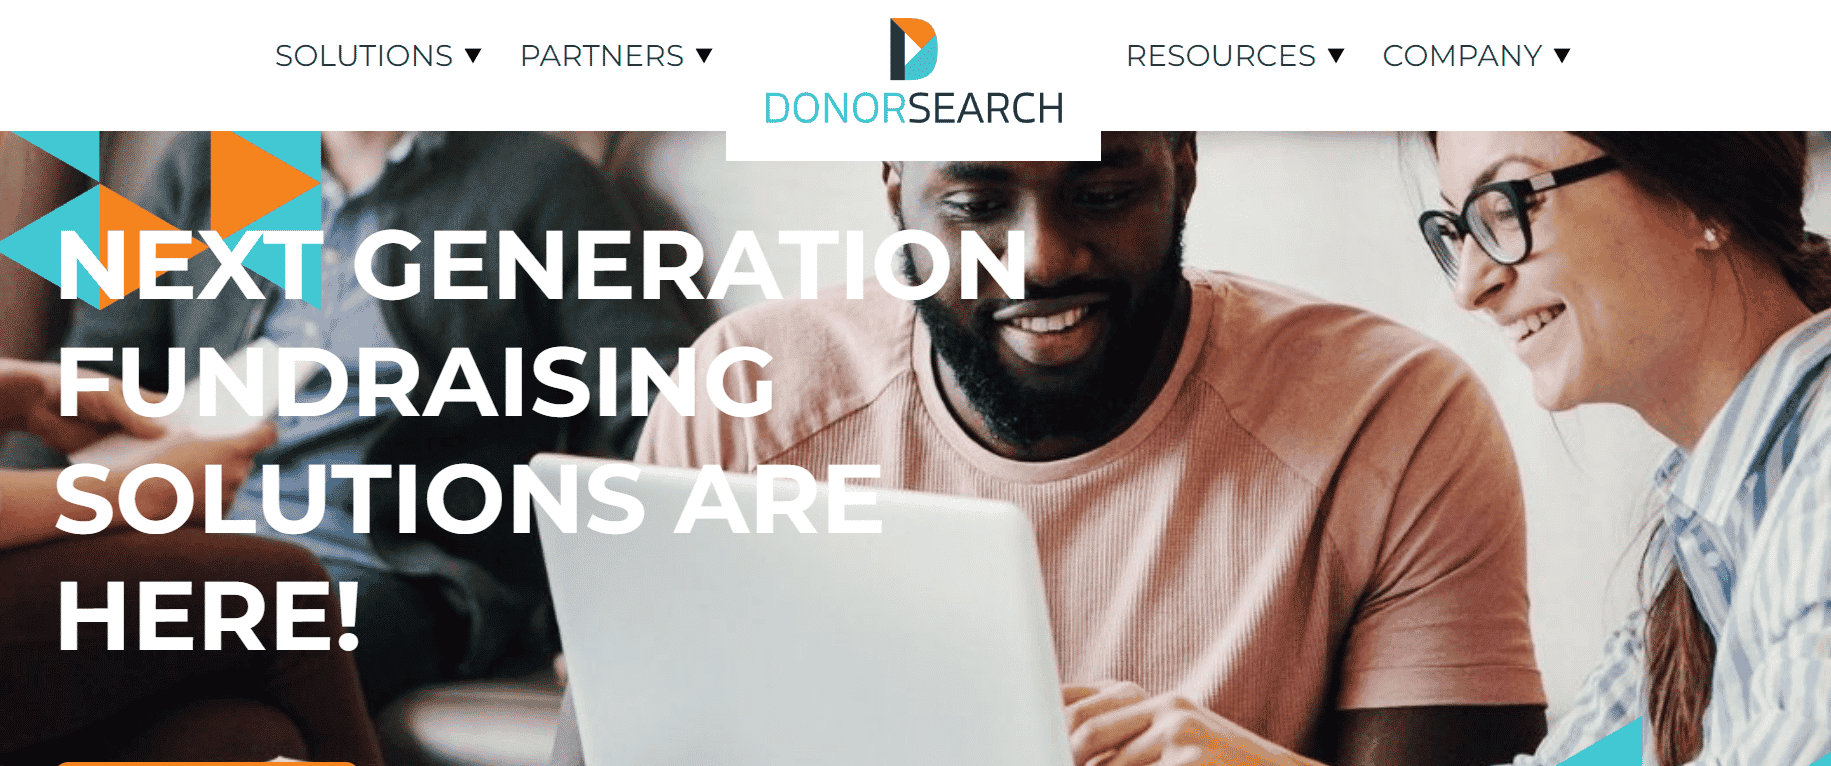 DonorSearch is an online fundraising software that helps manage prospect research. 